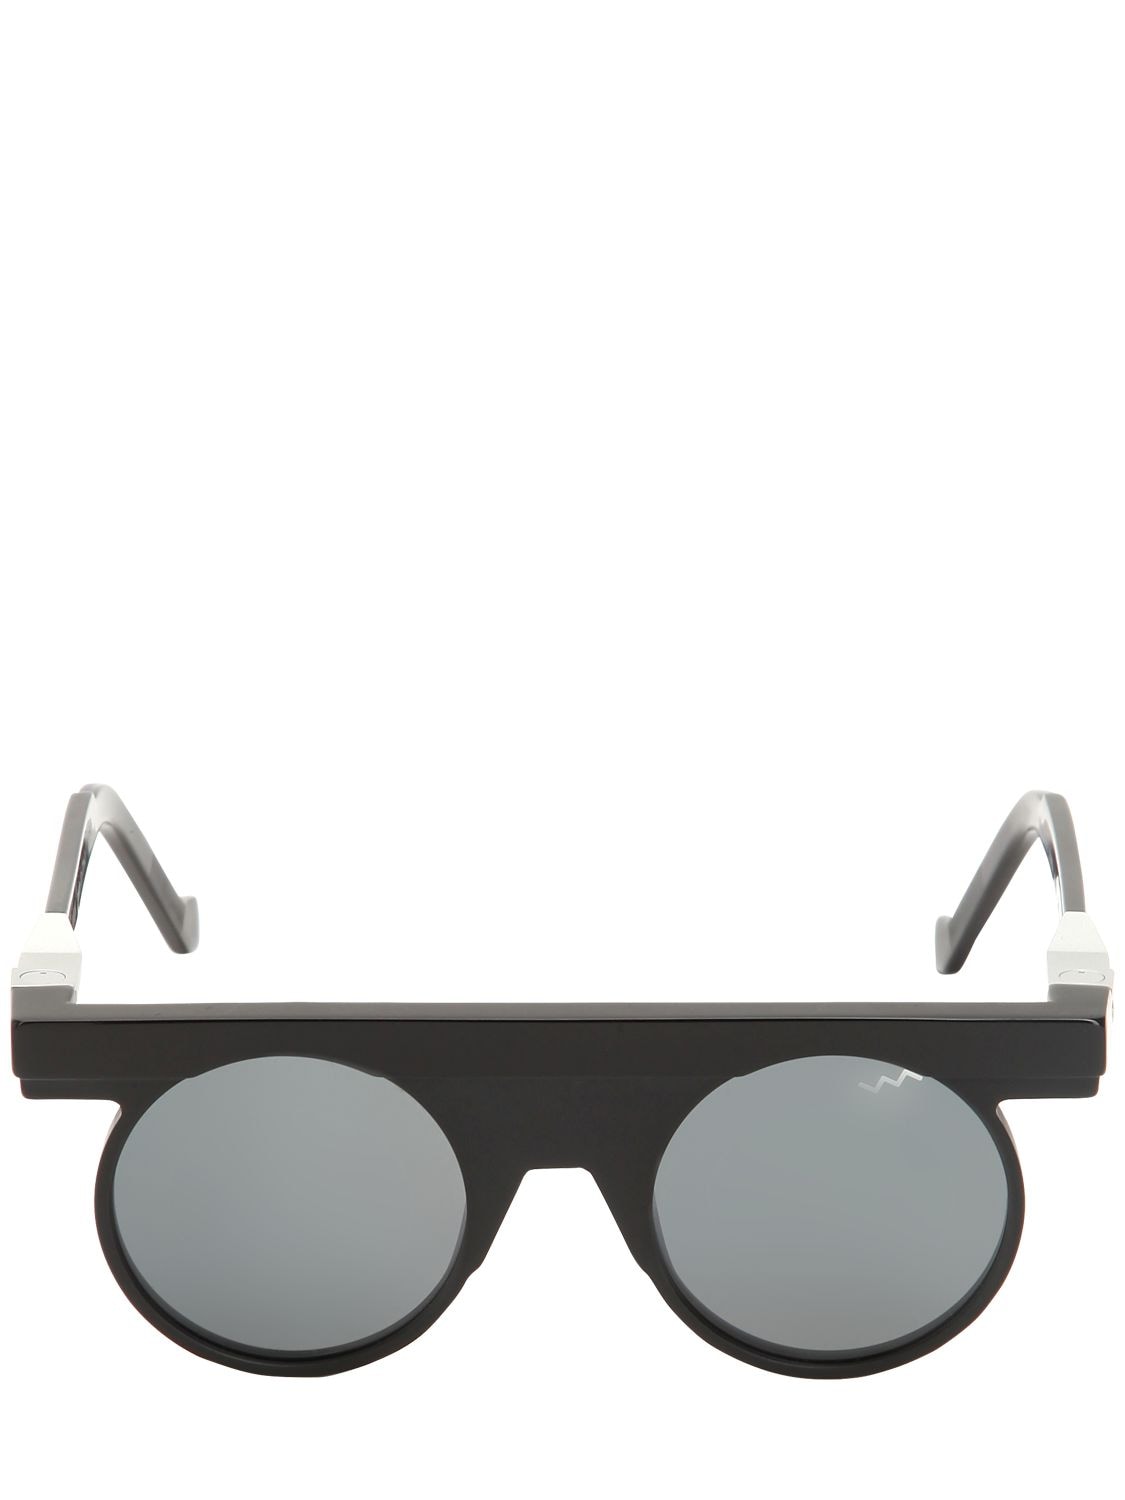 Vava Rounded Matte & Shiny Acetate Sunglasses In Black